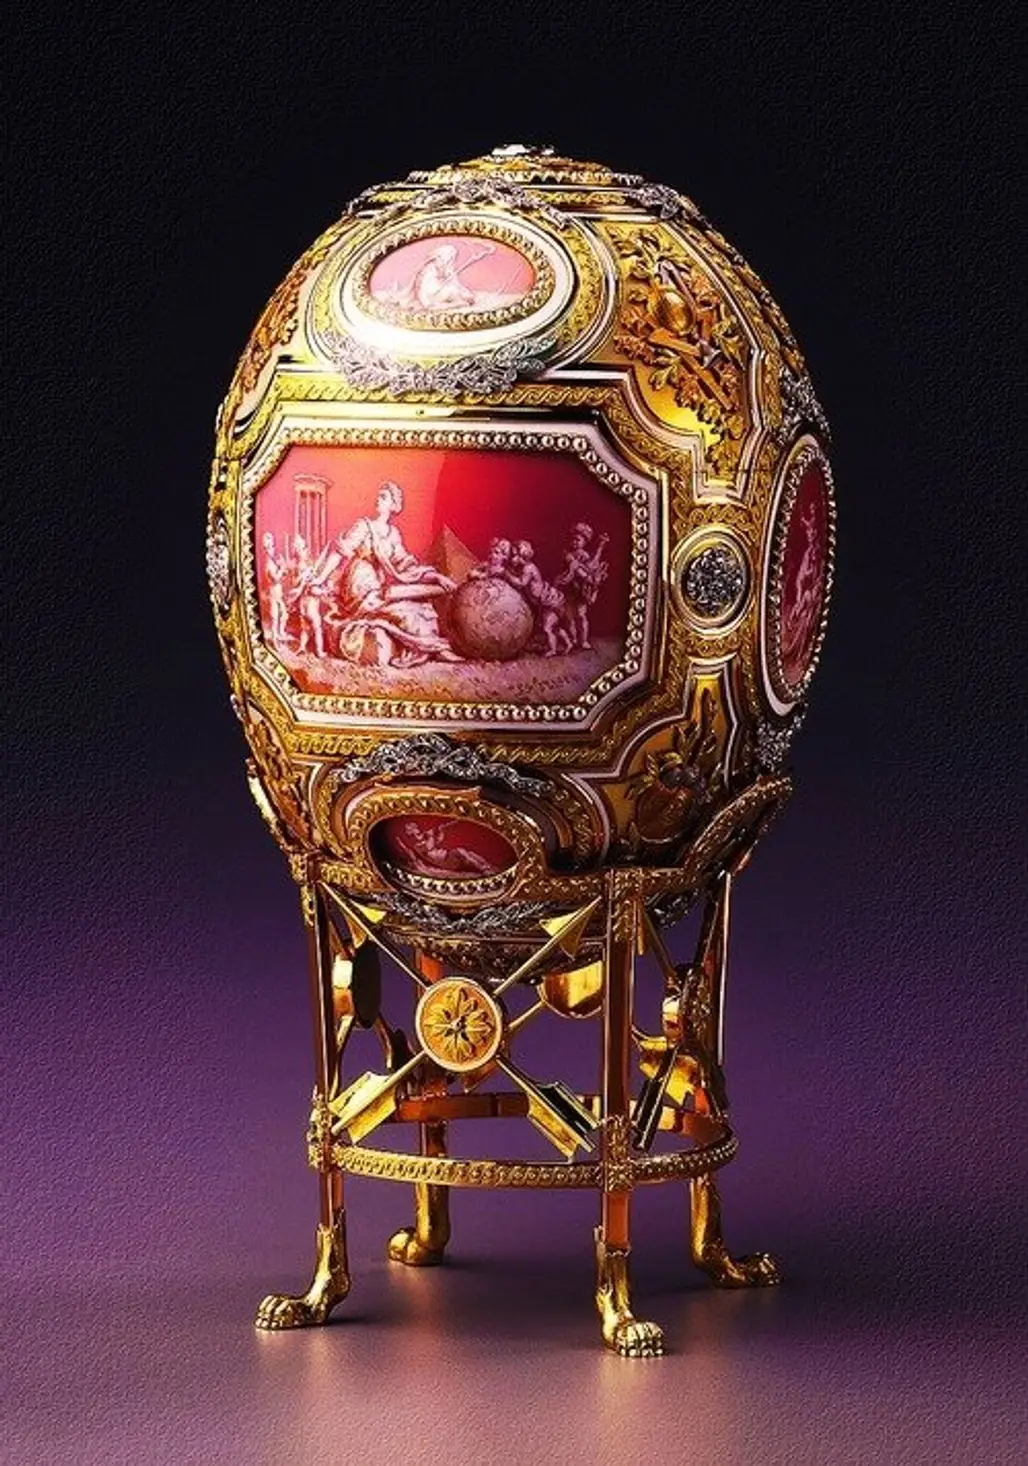 The Catherine the Great Egg